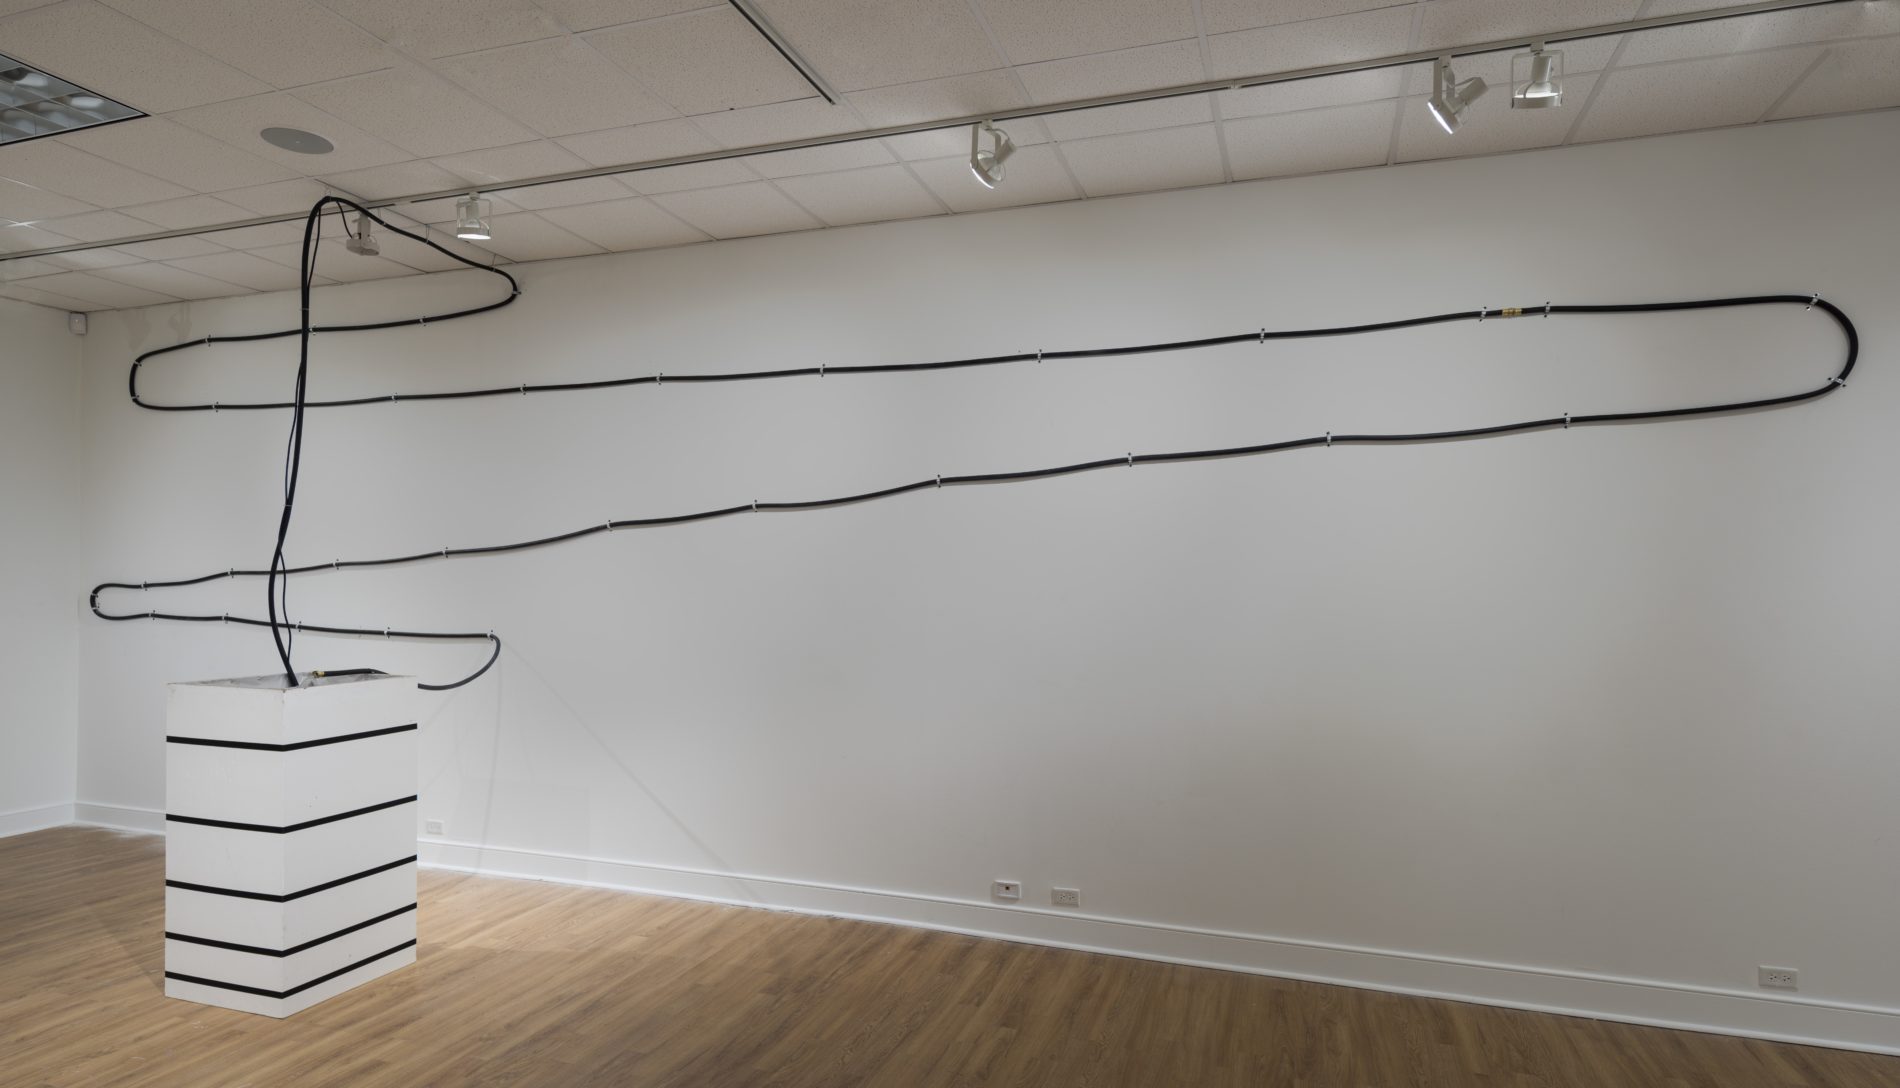 Black and white sculpture by Virginia Overton featuring live wires and water stands near a white gallery wall with light-colored wood flooring with spotlights illuminating different parts of the sculpture.